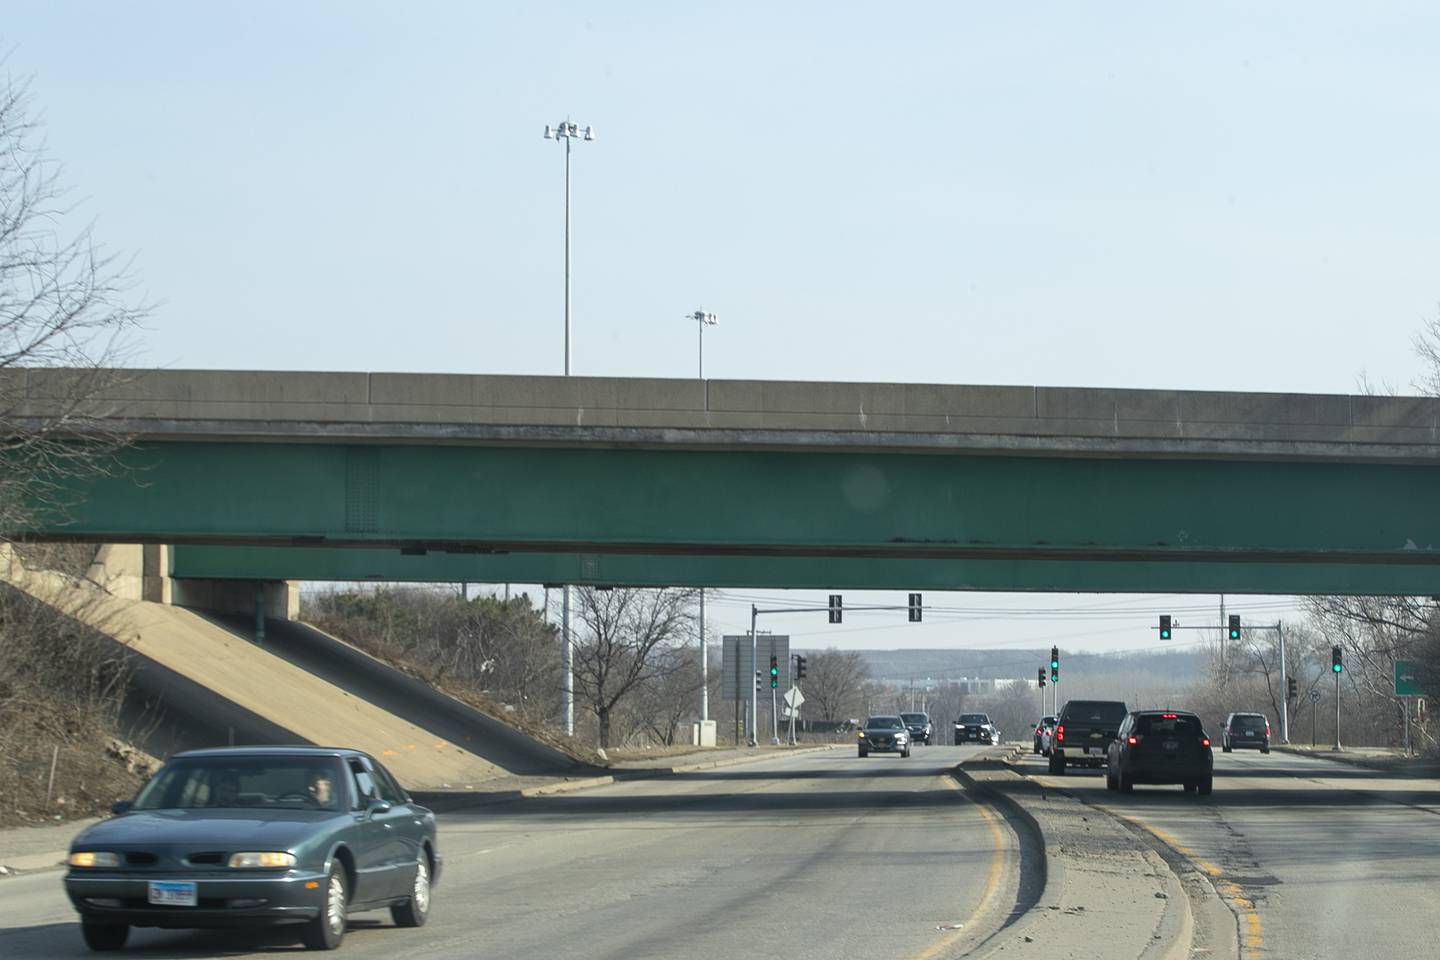 Cars pass pass under the I-80 bridge at Houbolt Rd. on Tuesday, March 9, 2021, in Joliet, Ill. A bridge across the Des Plaines River is proposed at the intersection of Rt. 6 and Houbolt Road.